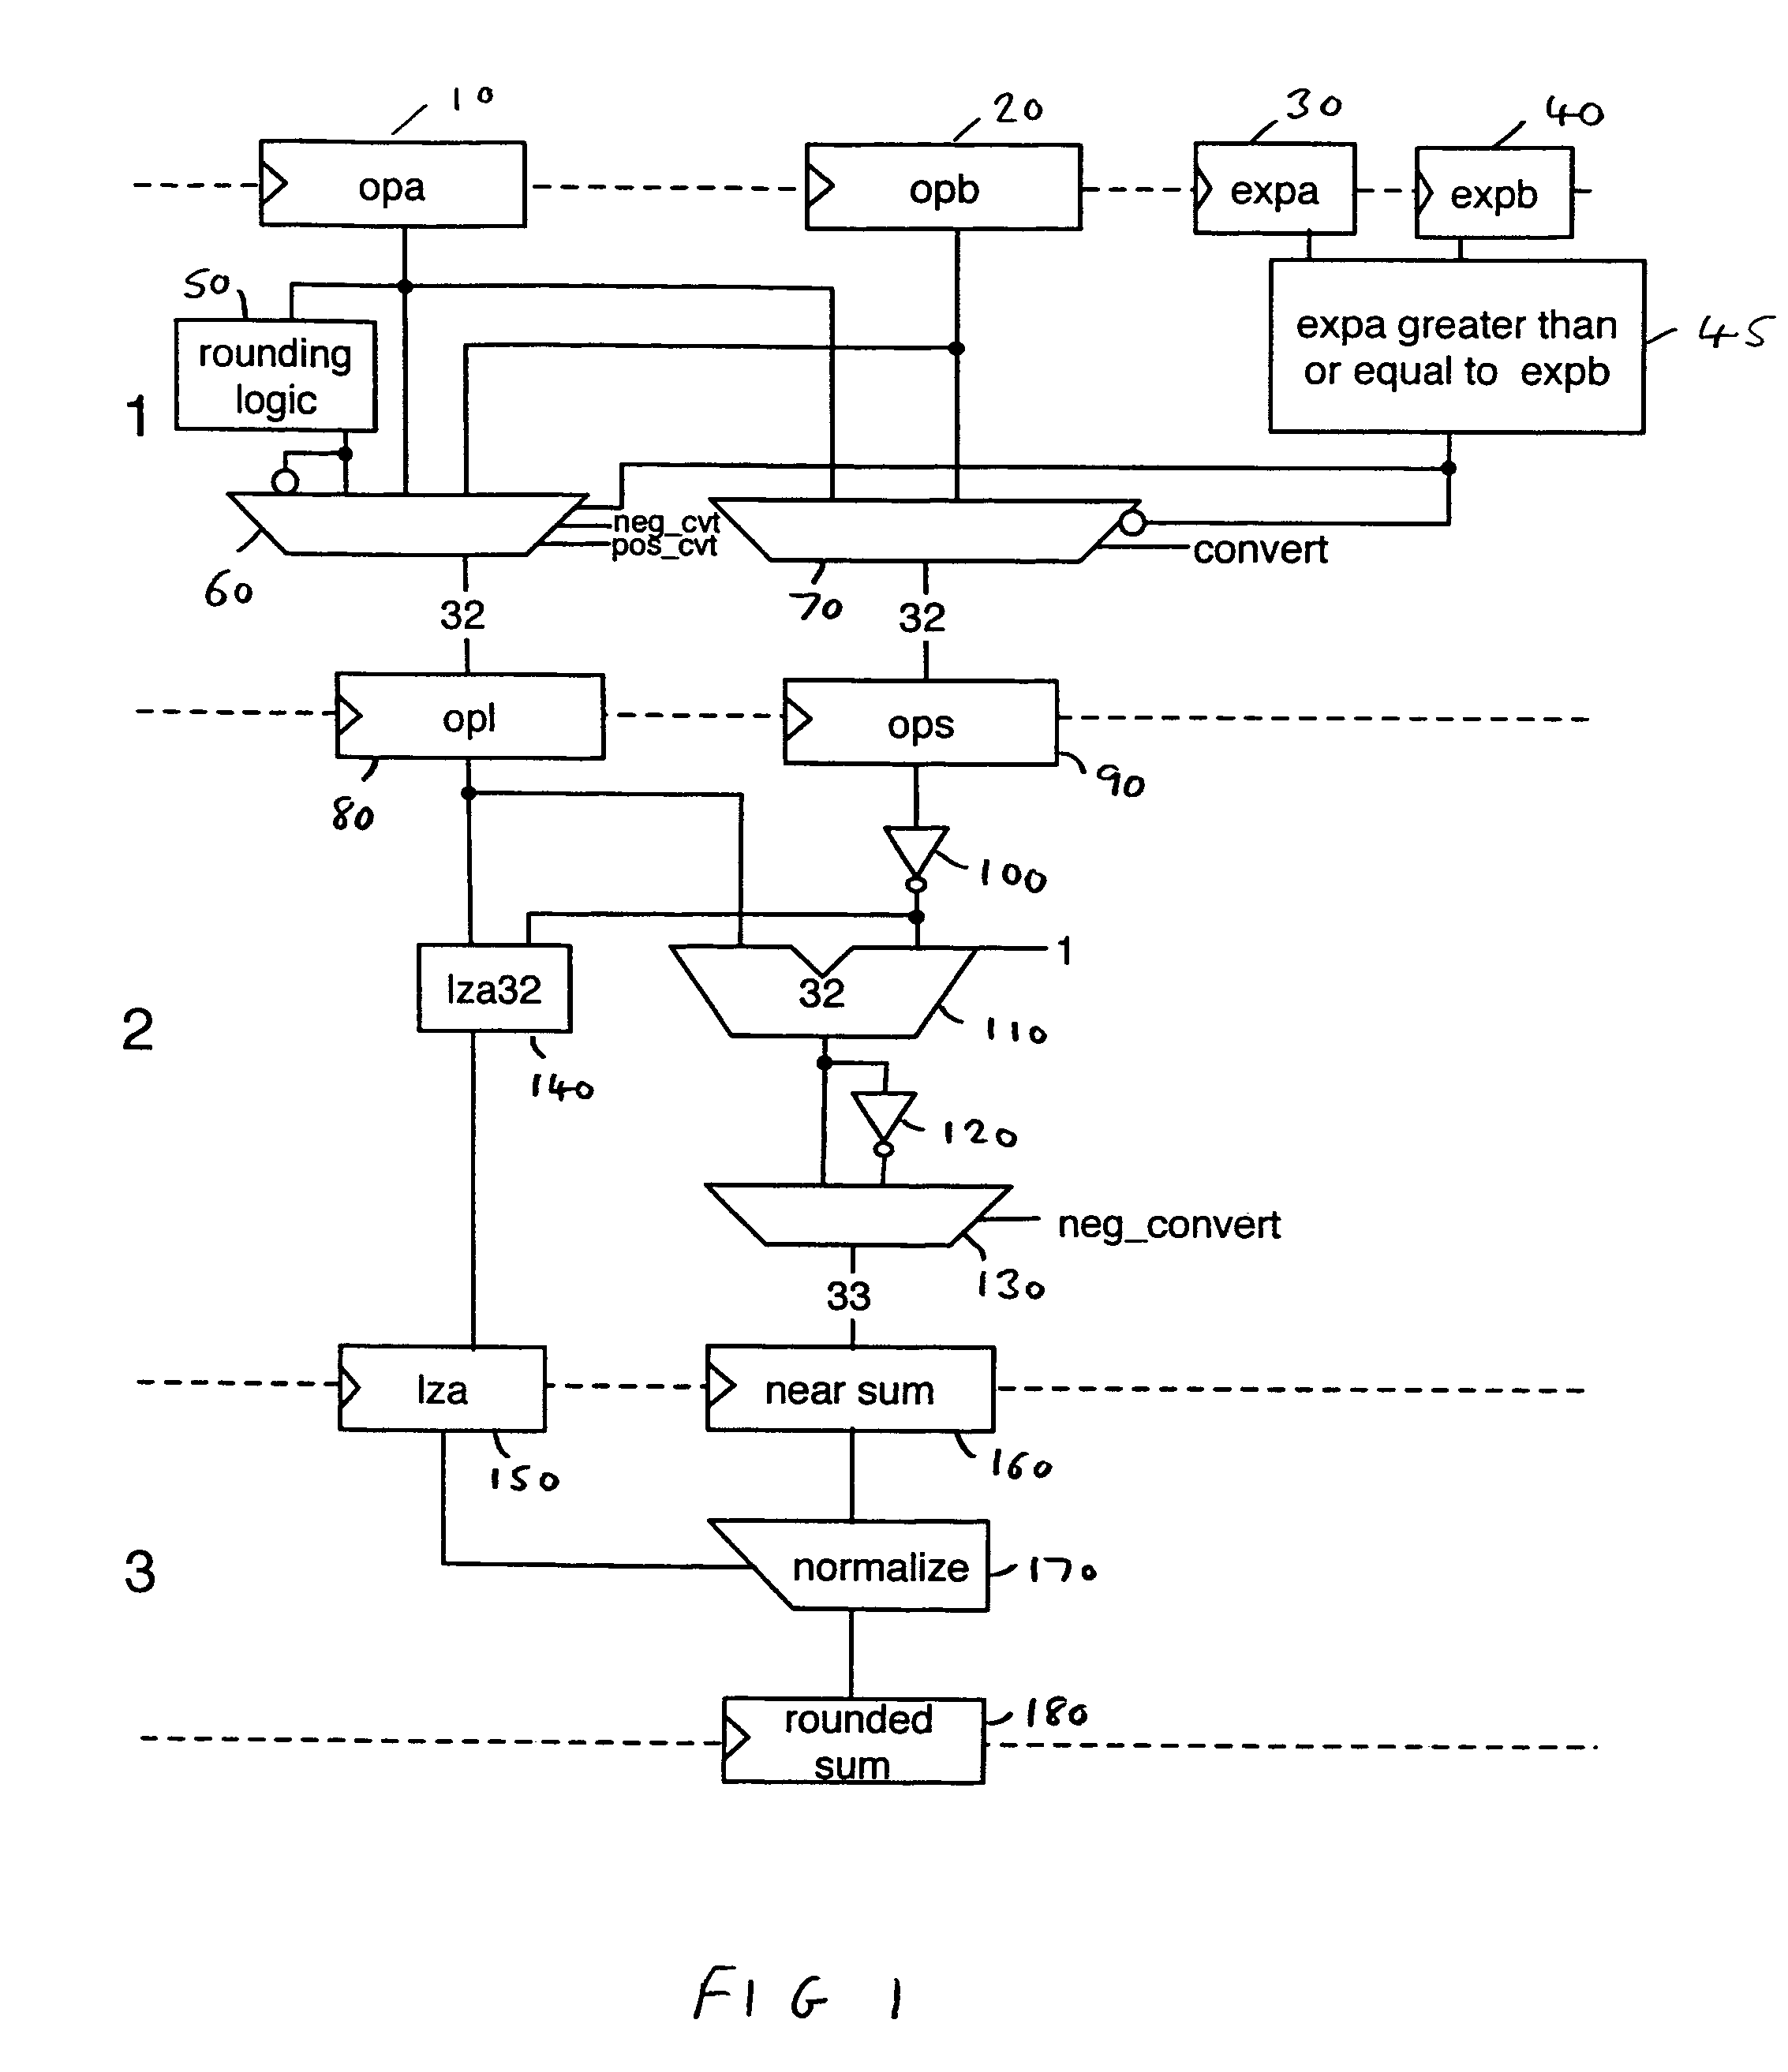 Data processing apparatus and method for converting a fixed point number to a floating point number